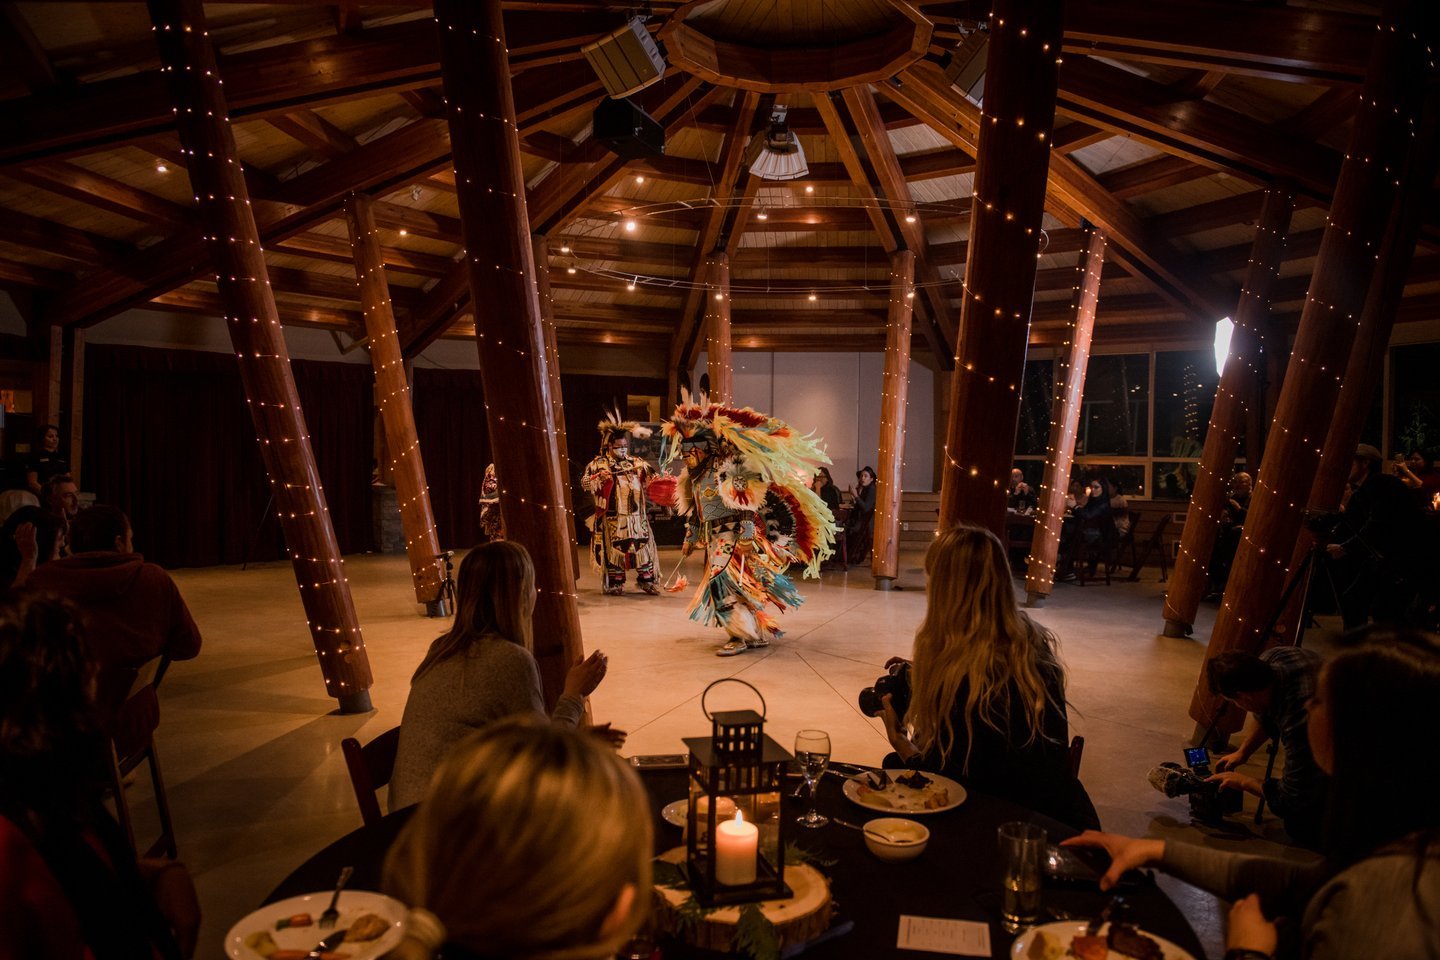 Indigenous Peoples Week at Squamish Lil'wat Cultural Centre: